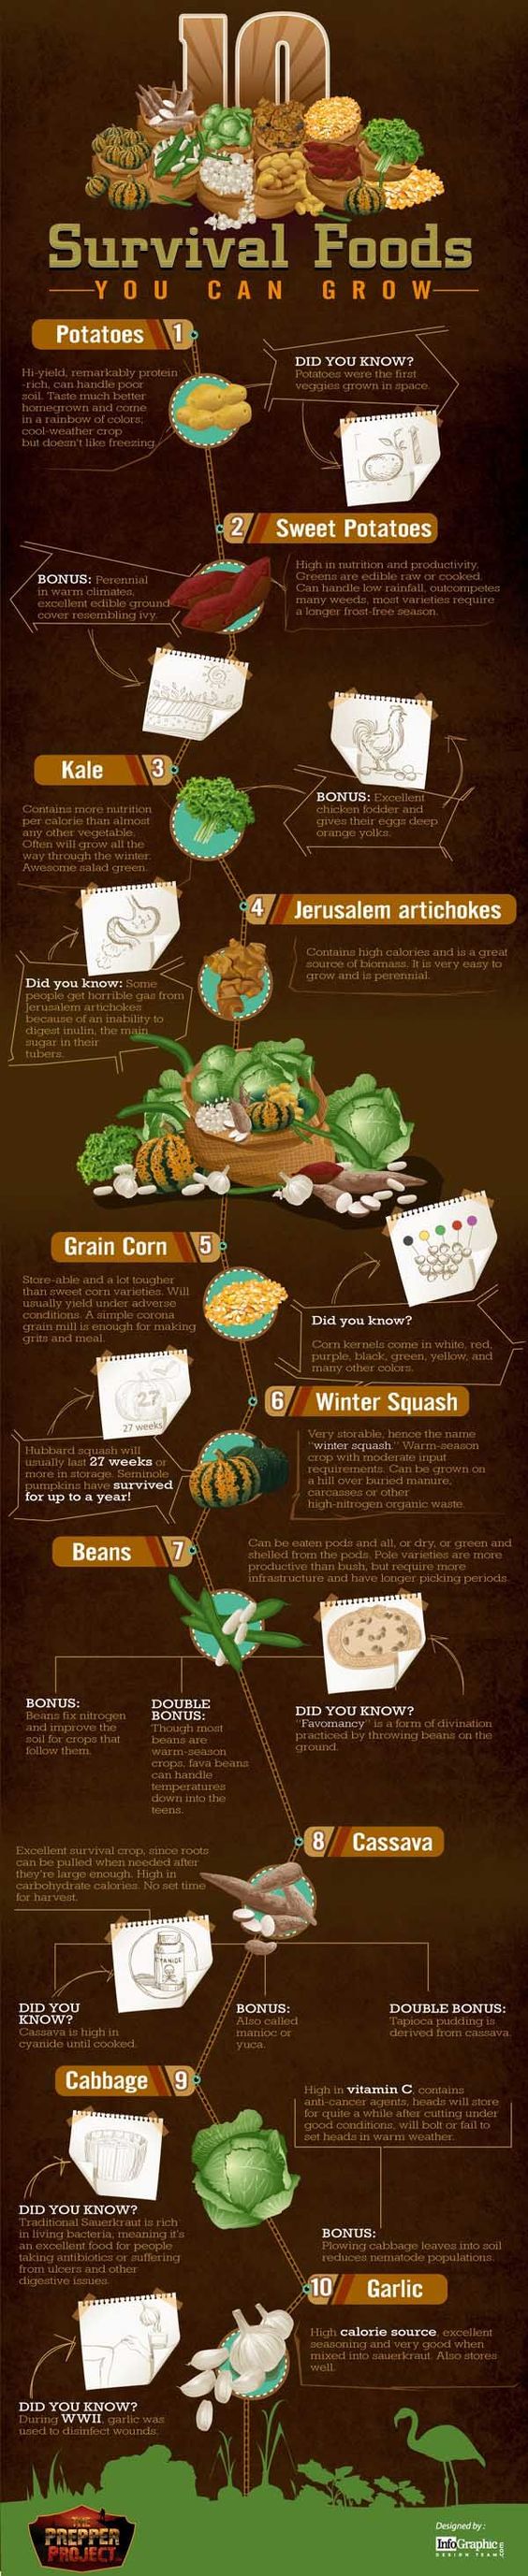 Survival foods you can grow